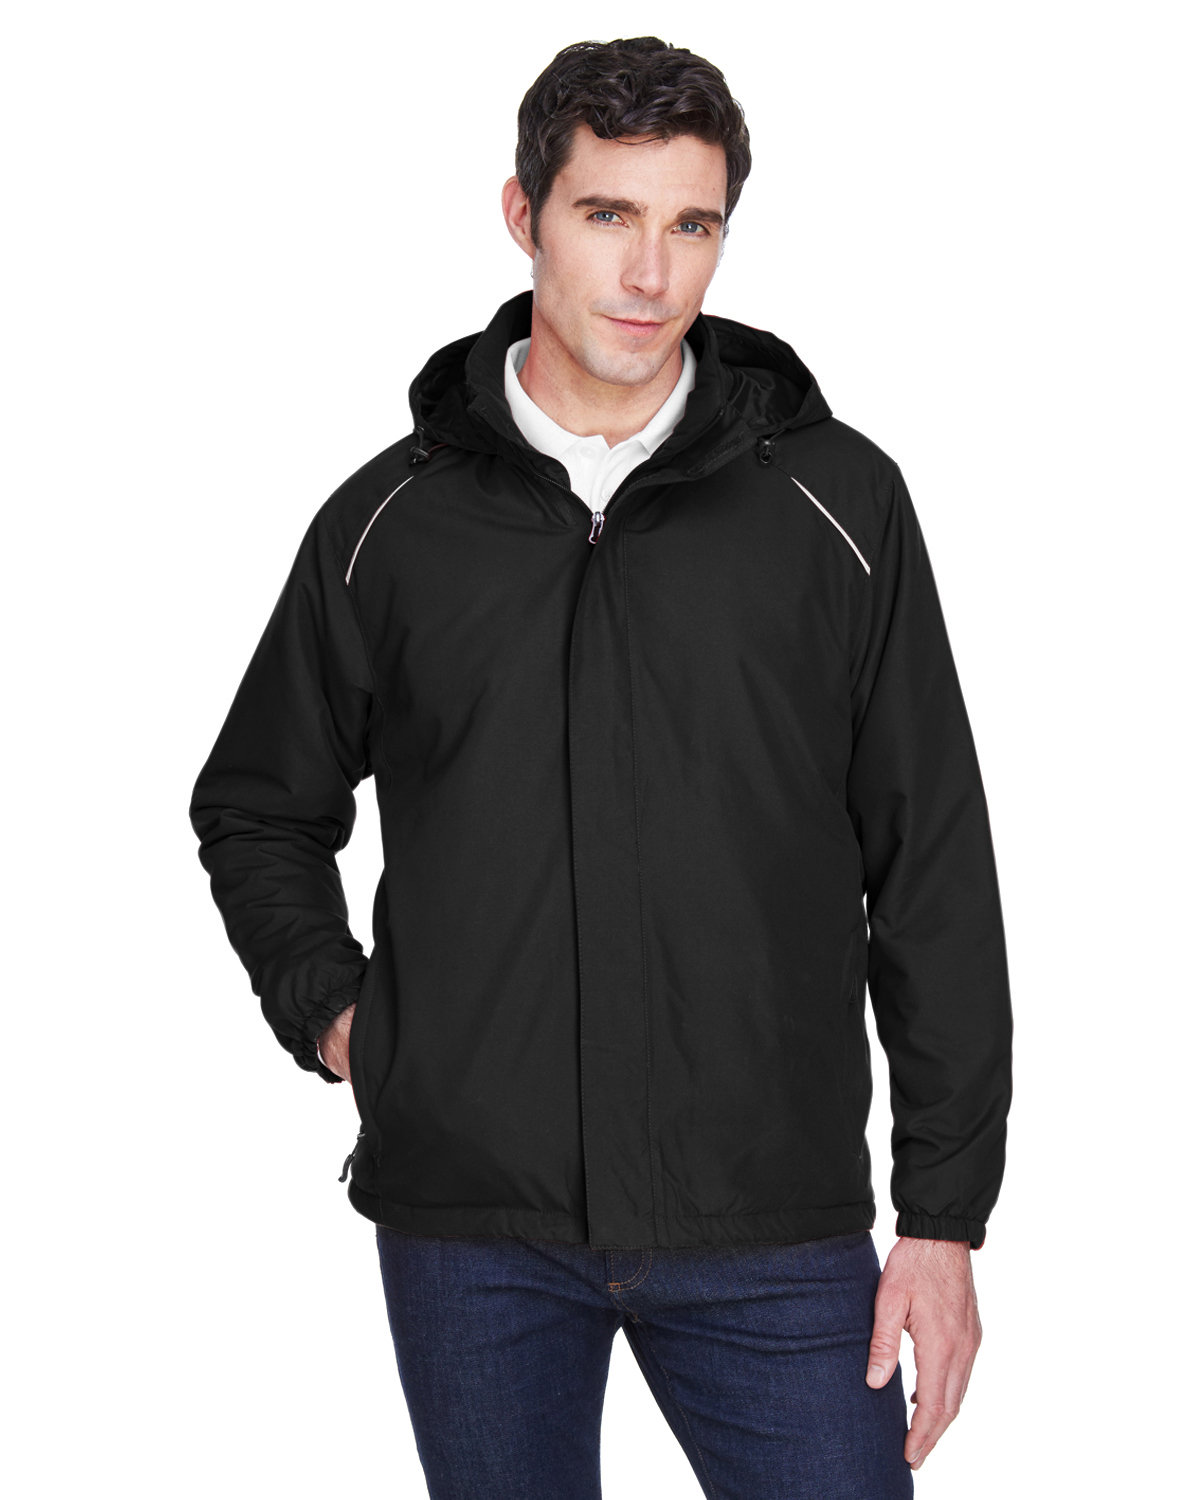 Core 365 88189T - Men's Tall Brisk Insulated Jacket